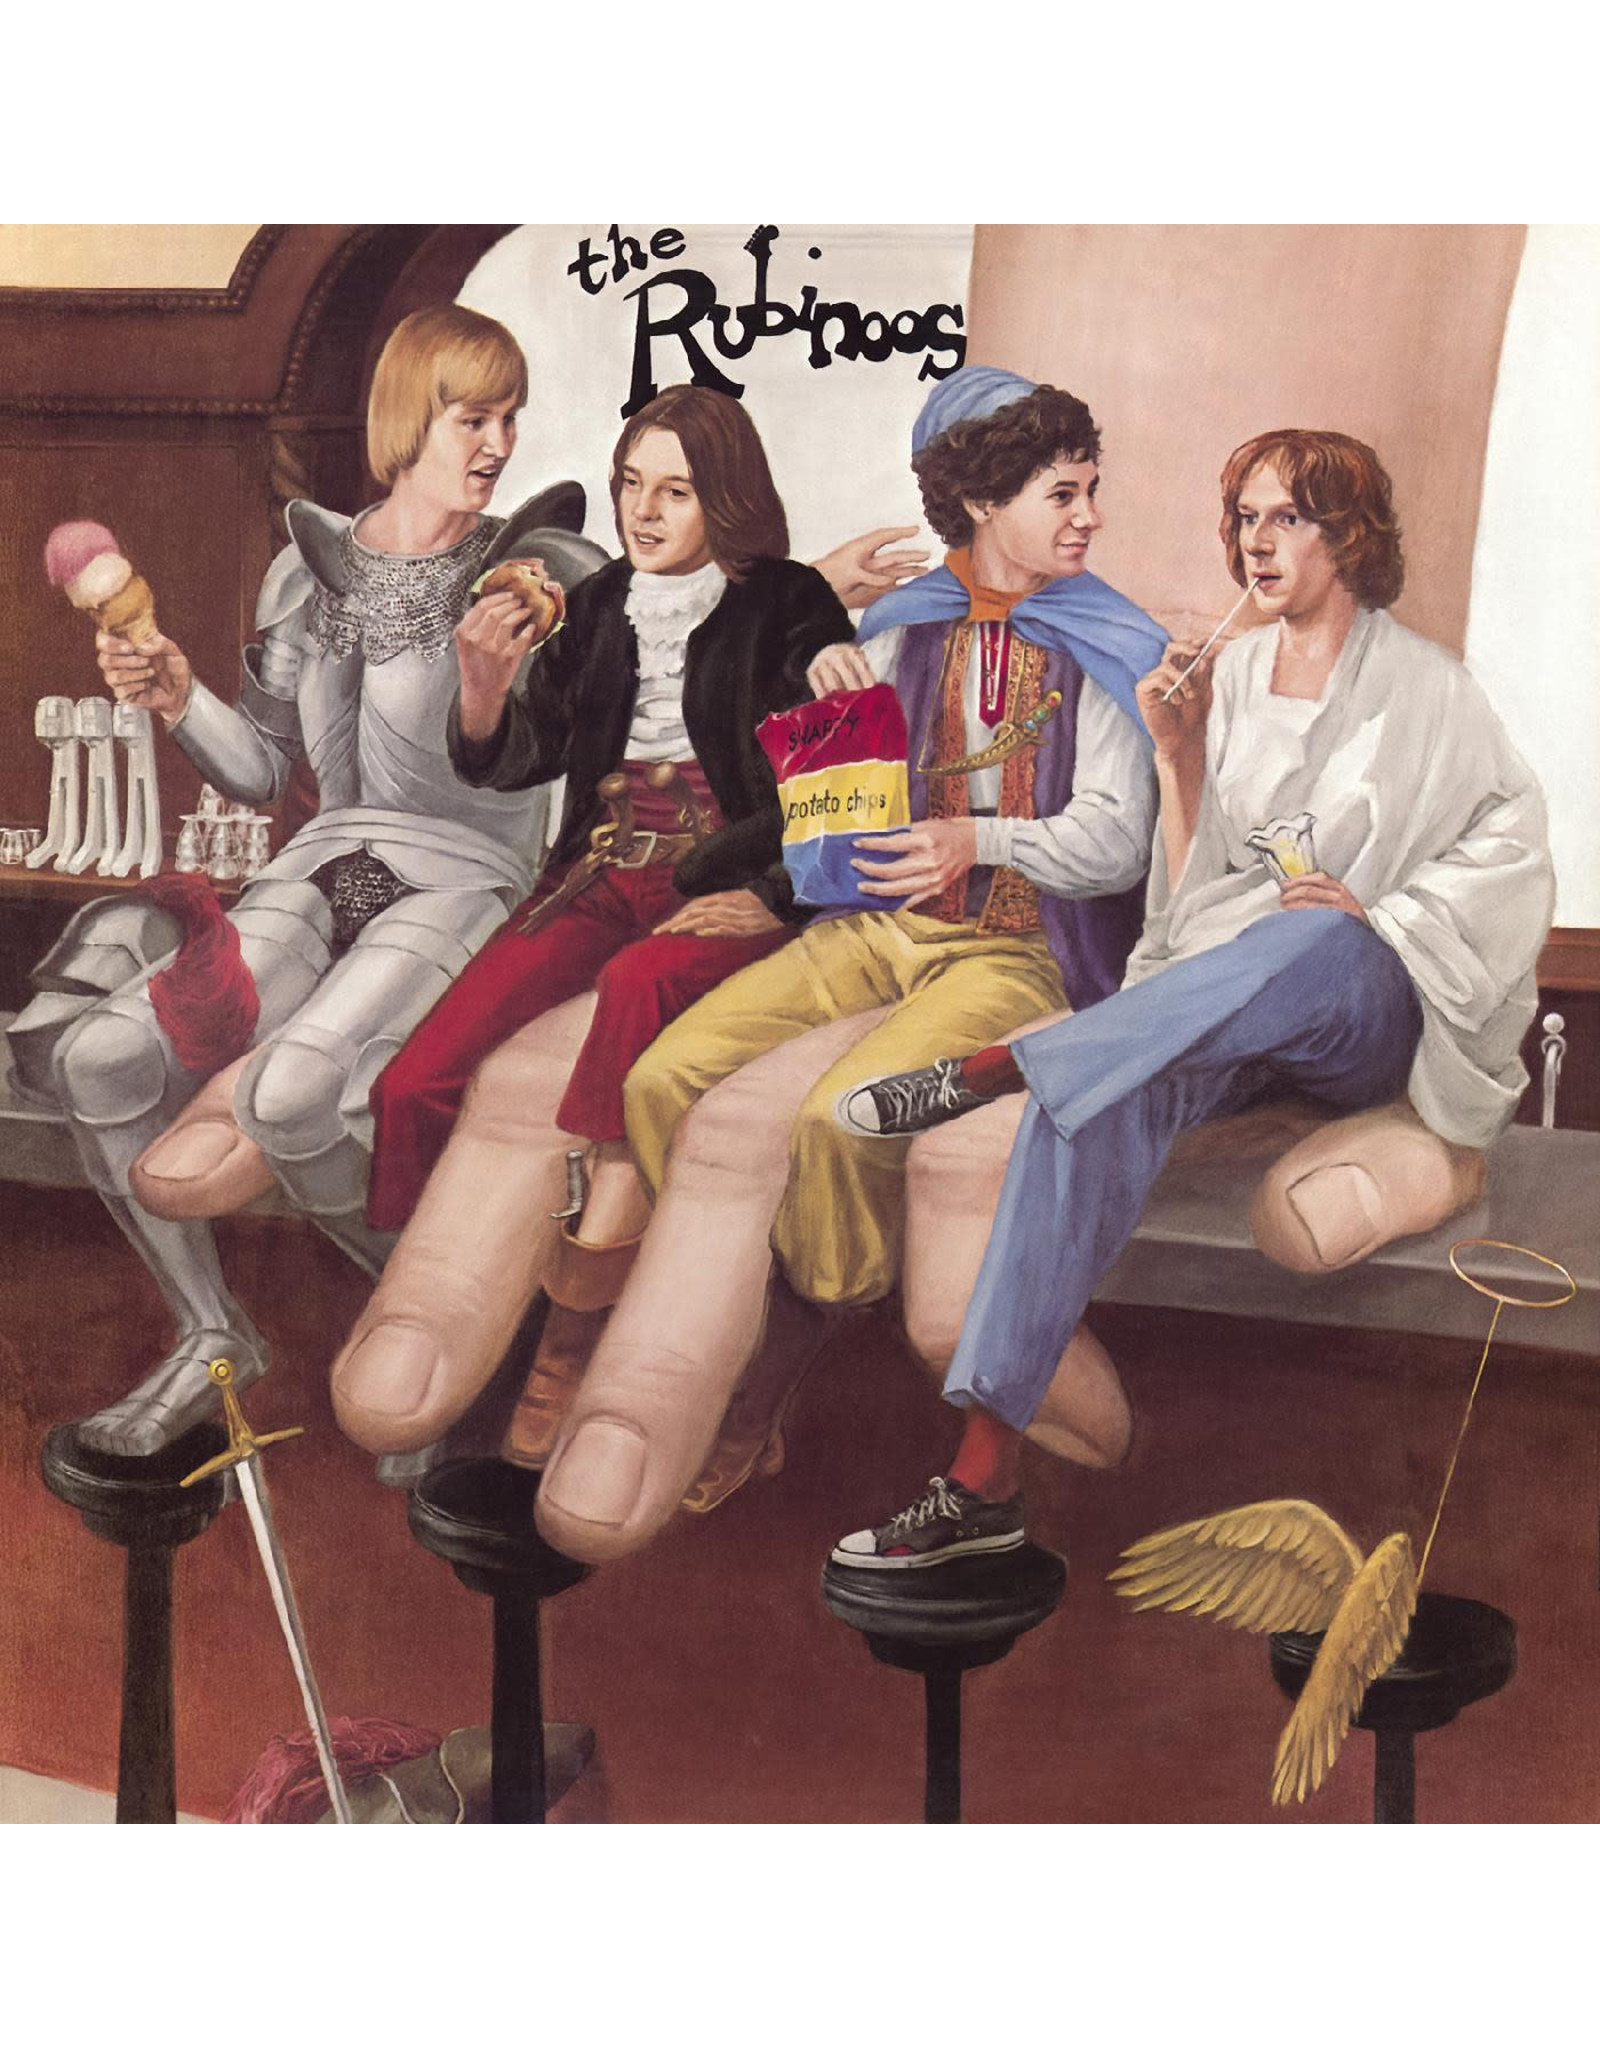 Rubinoos - S/T LP (Limited Records Store Day Pressing on Yellow Vinyl)